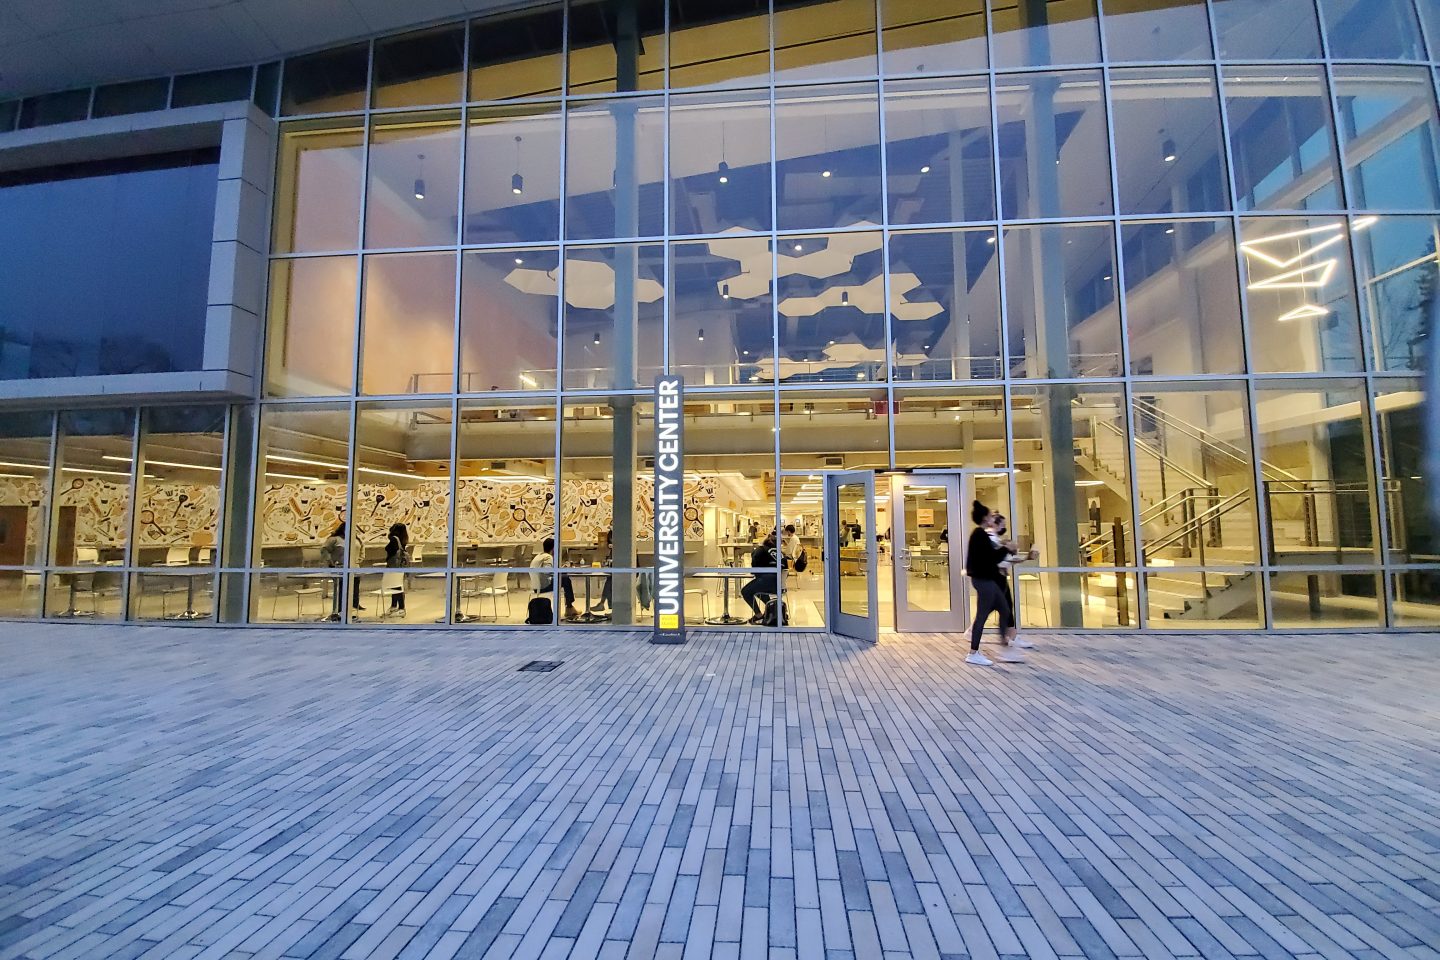 The all-glass front entrance of the Ruth S. Harley University Center, shown at night with the interior lobby illuminated from floor to ceiling